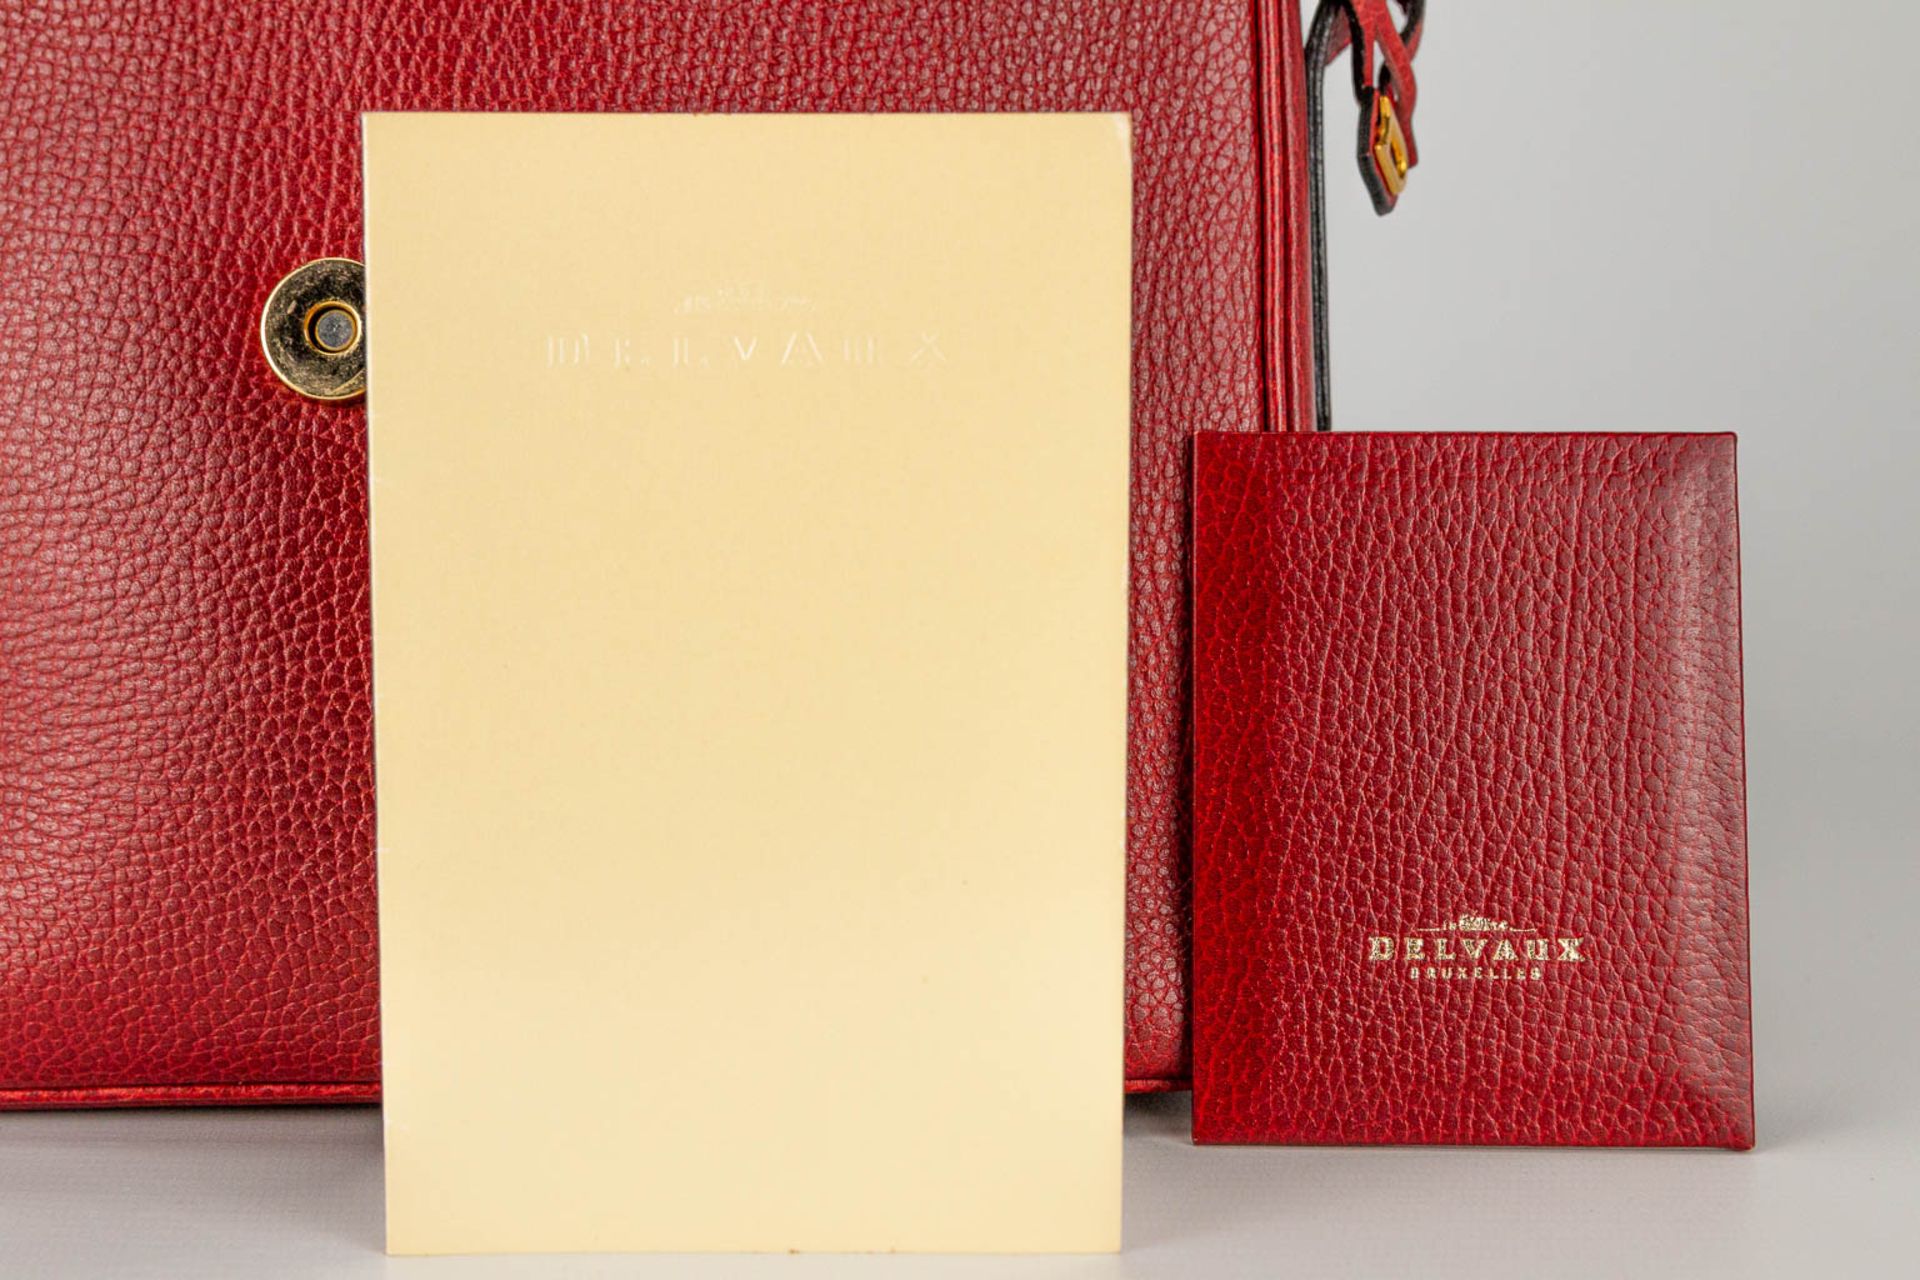 A purse made of red leather and marked Delvaux. - Image 10 of 16